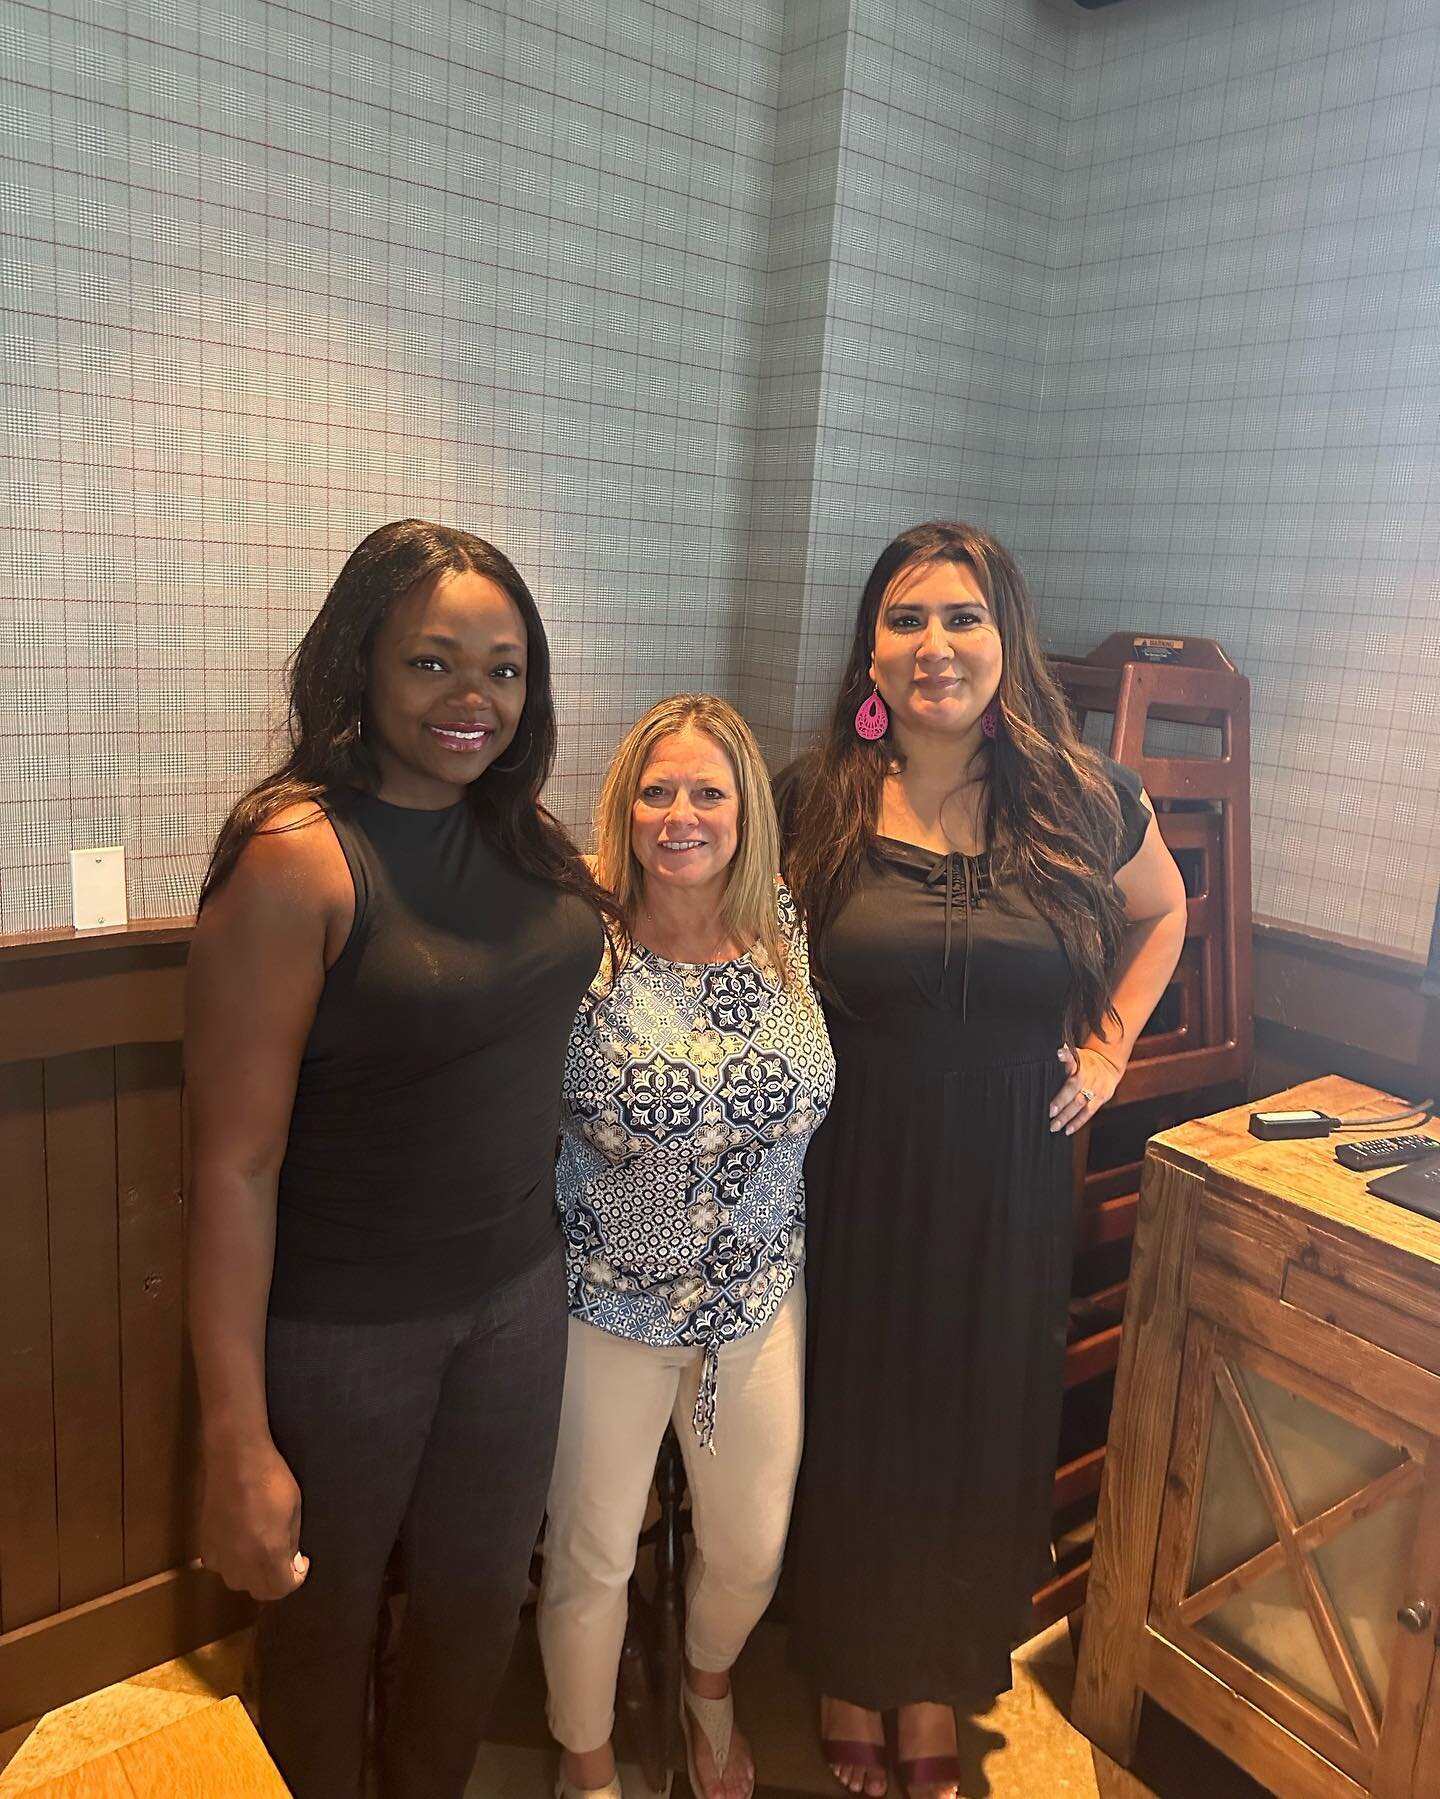 Yesterday was an incredible day connecting with our esteemed partners from Apple Leisure Group and the Inclusive Resorts collection. I gained valuable insights into upcoming resort openings in Mexico and the Caribbean. I had the privilege of meeting 